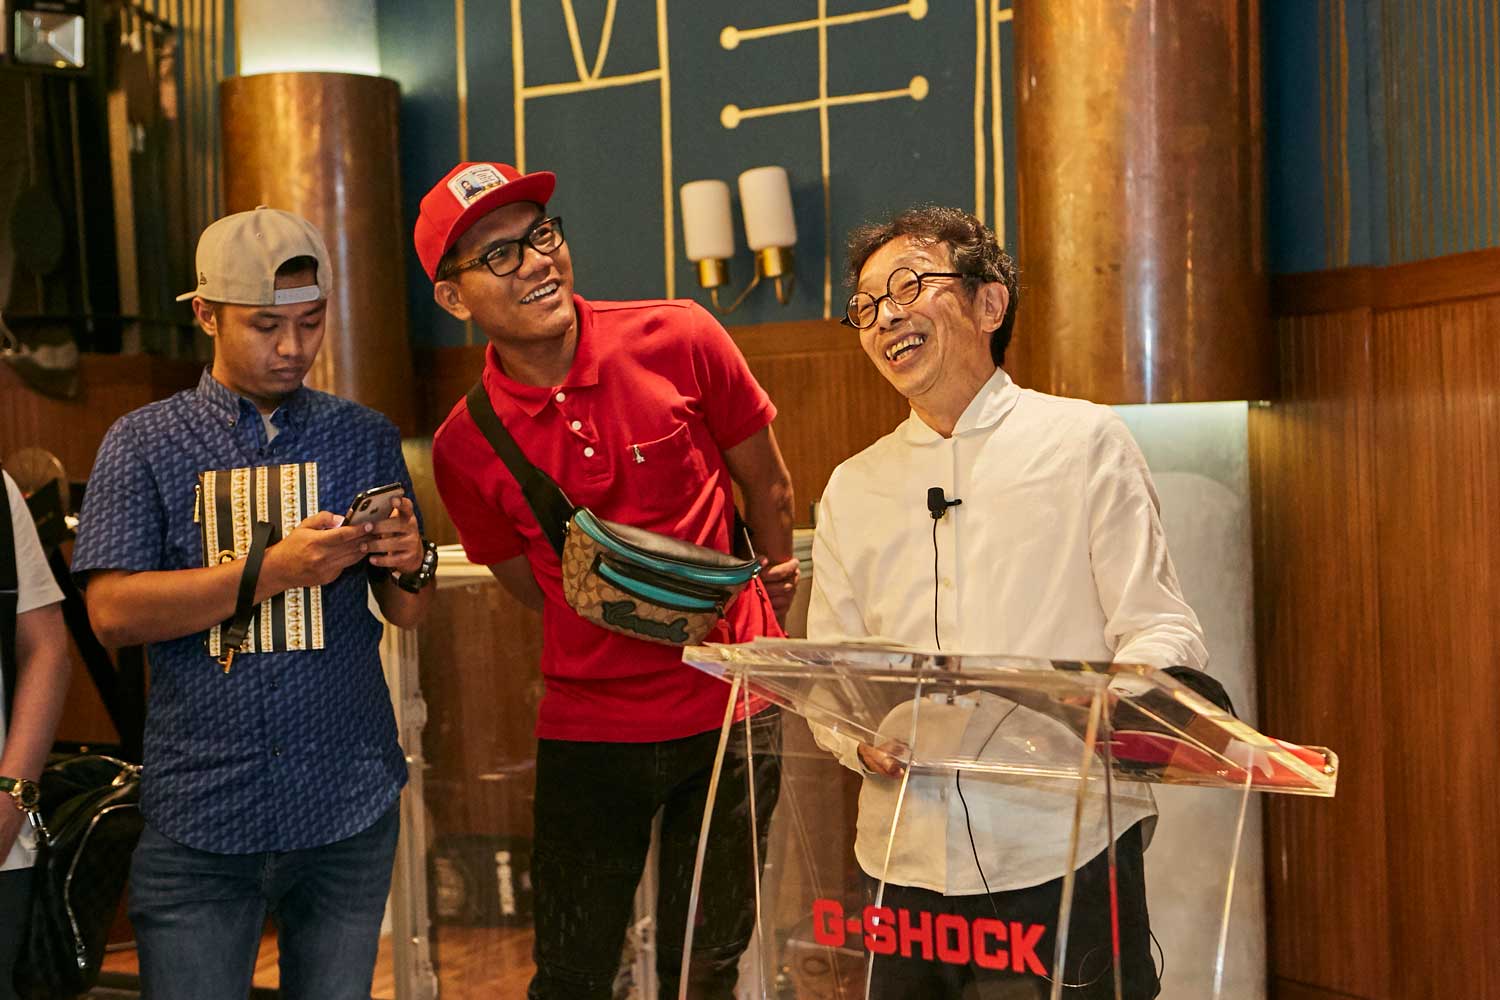 An elated Kikuo Ibe, addressing the guests at the G-SHOCK x Revolution dinner event